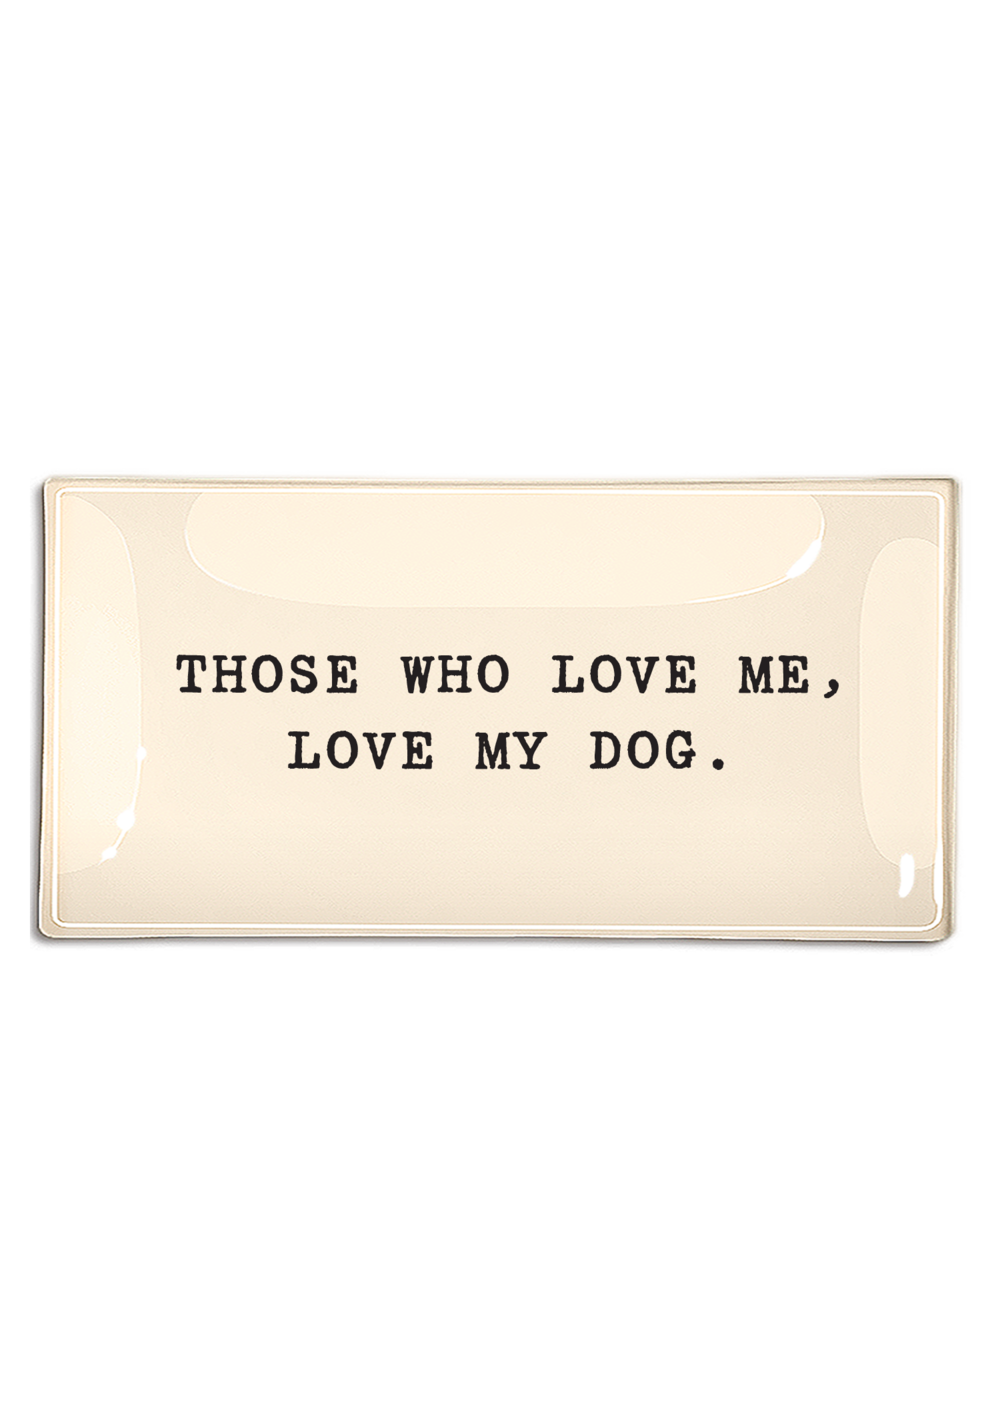 Those Who Love Me, Love My Dog 9x4 Decoupage Glass Tray by Ben’s Garden